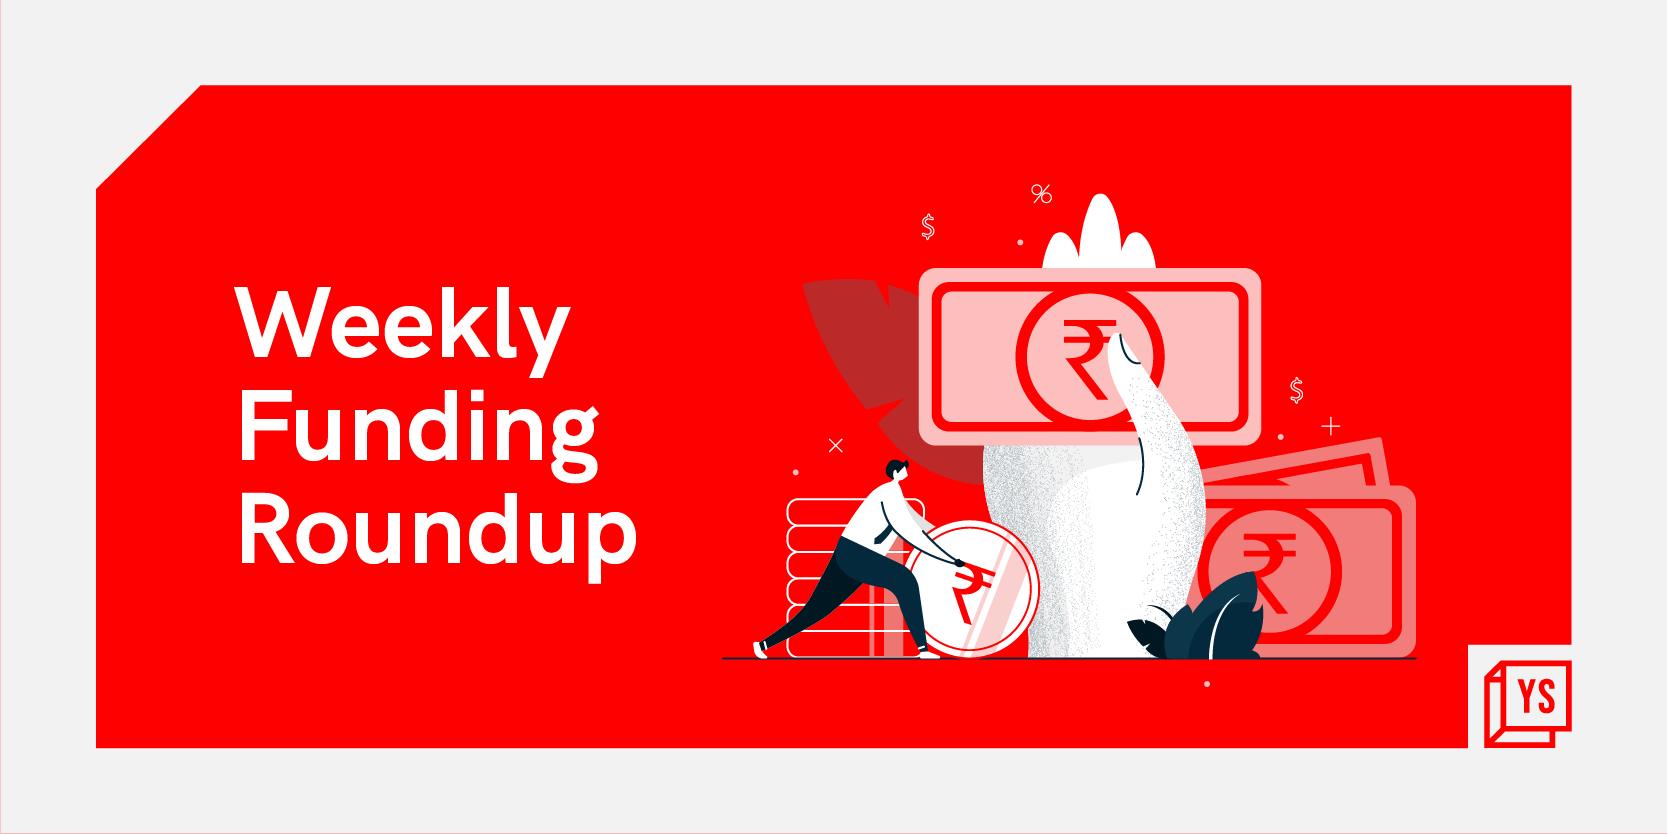 [Weekly funding roundup Oct 3-7] Venture capital inflow into startups continues to decline

